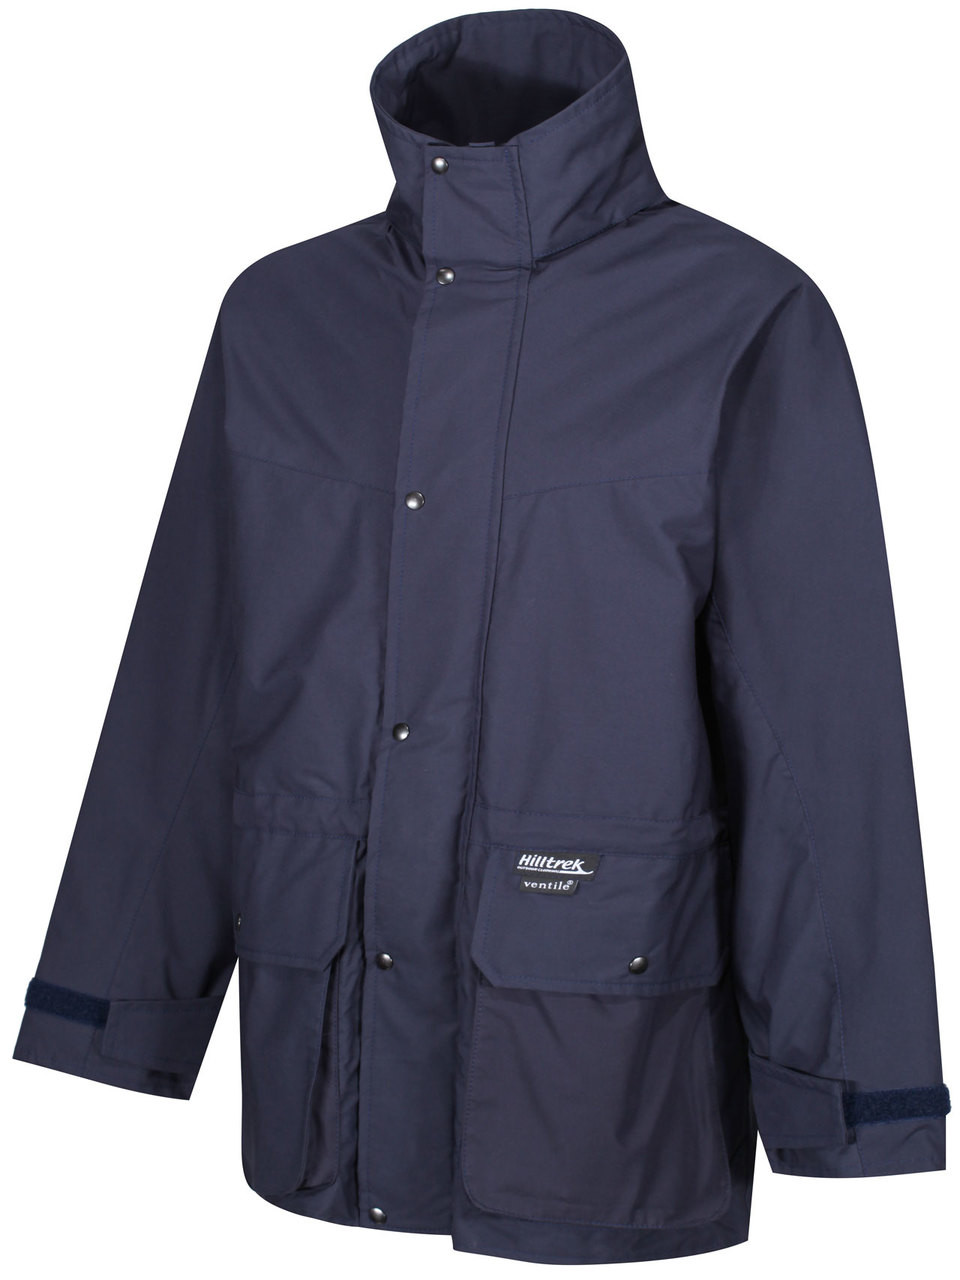 Rannoch Jacket in Double Ventile® - fully specified for a wide range of ...